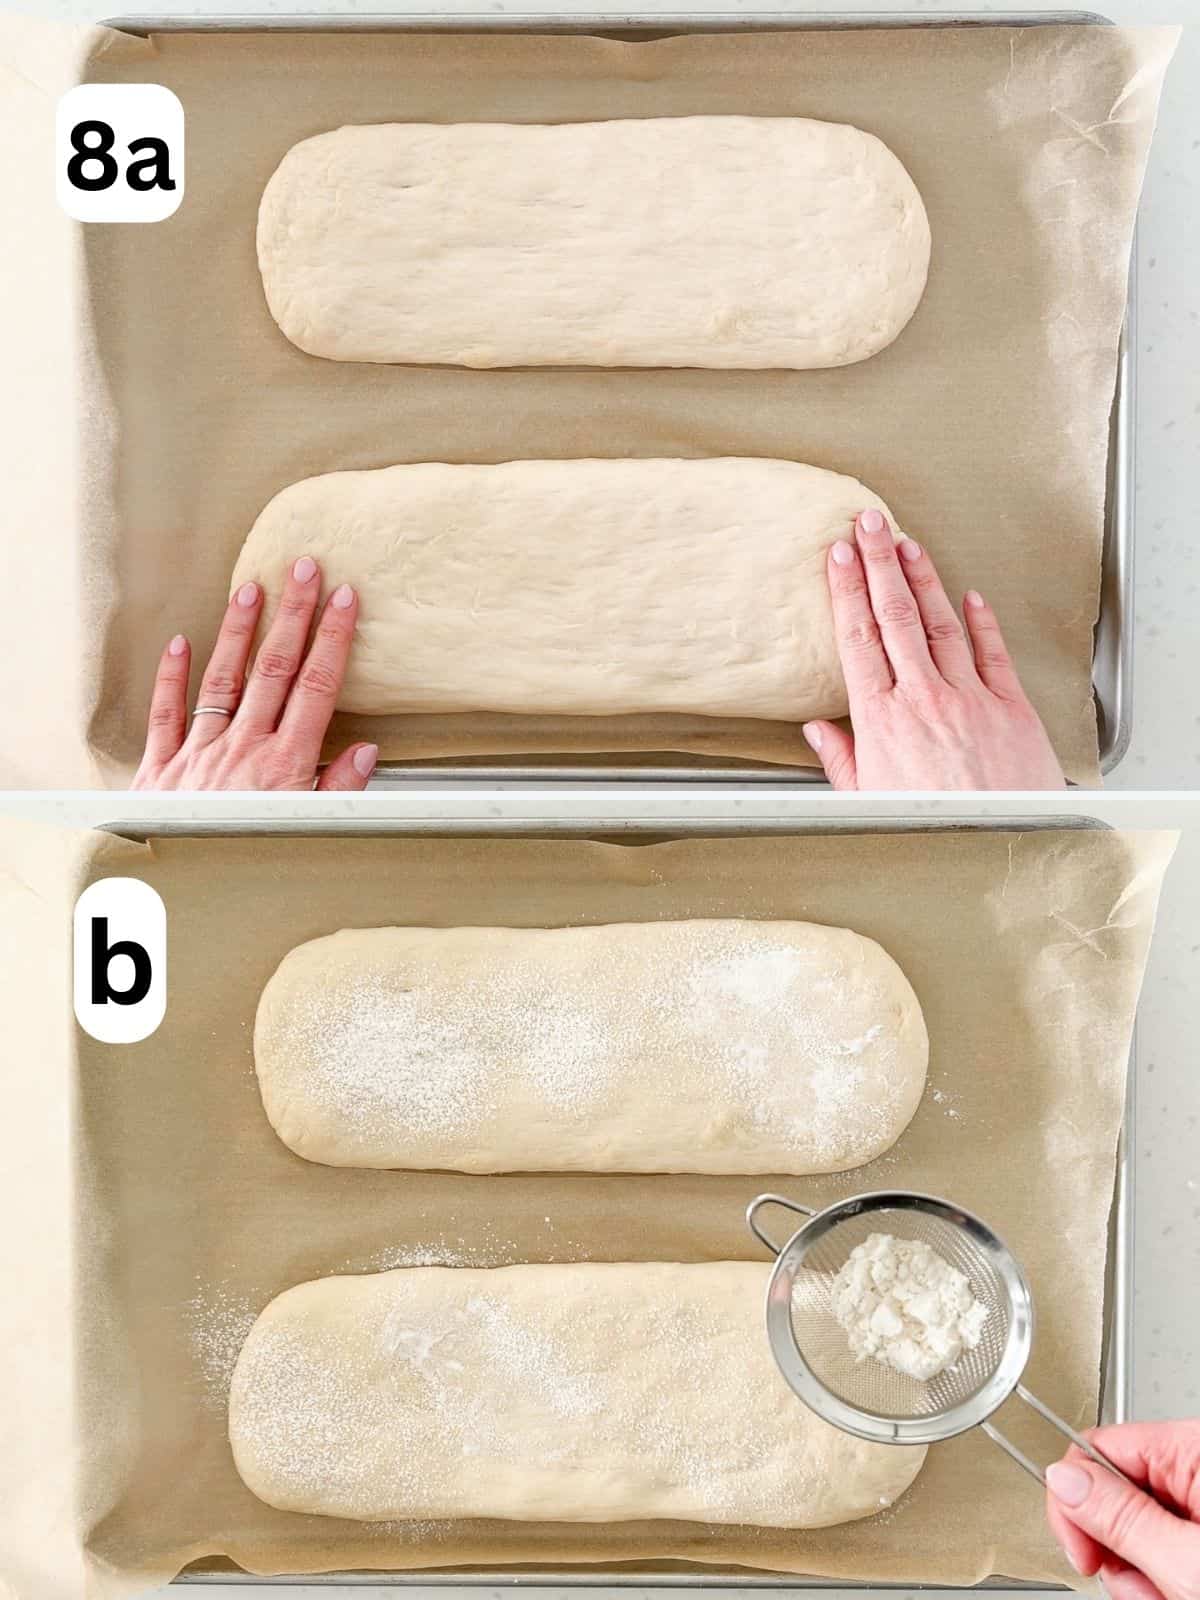 The dough is stretched into longer loaves and lightly dusted with flour.